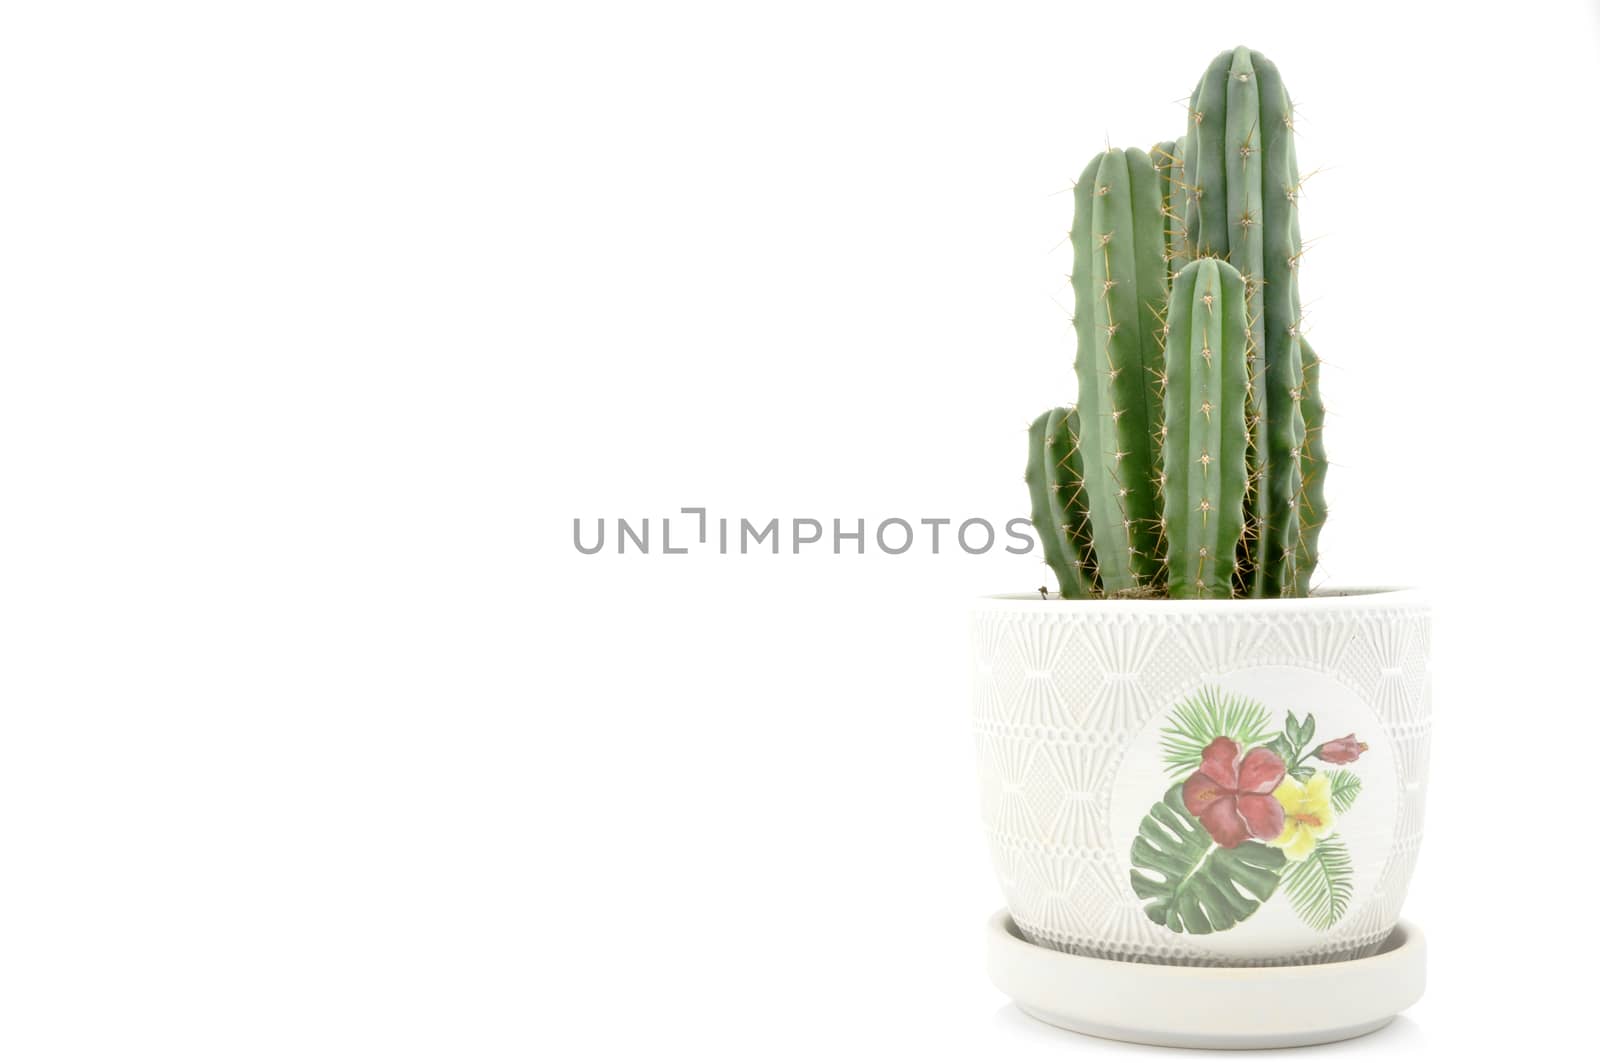 Cactus collection for decoration in pots, isolated on white background with reflection on floor